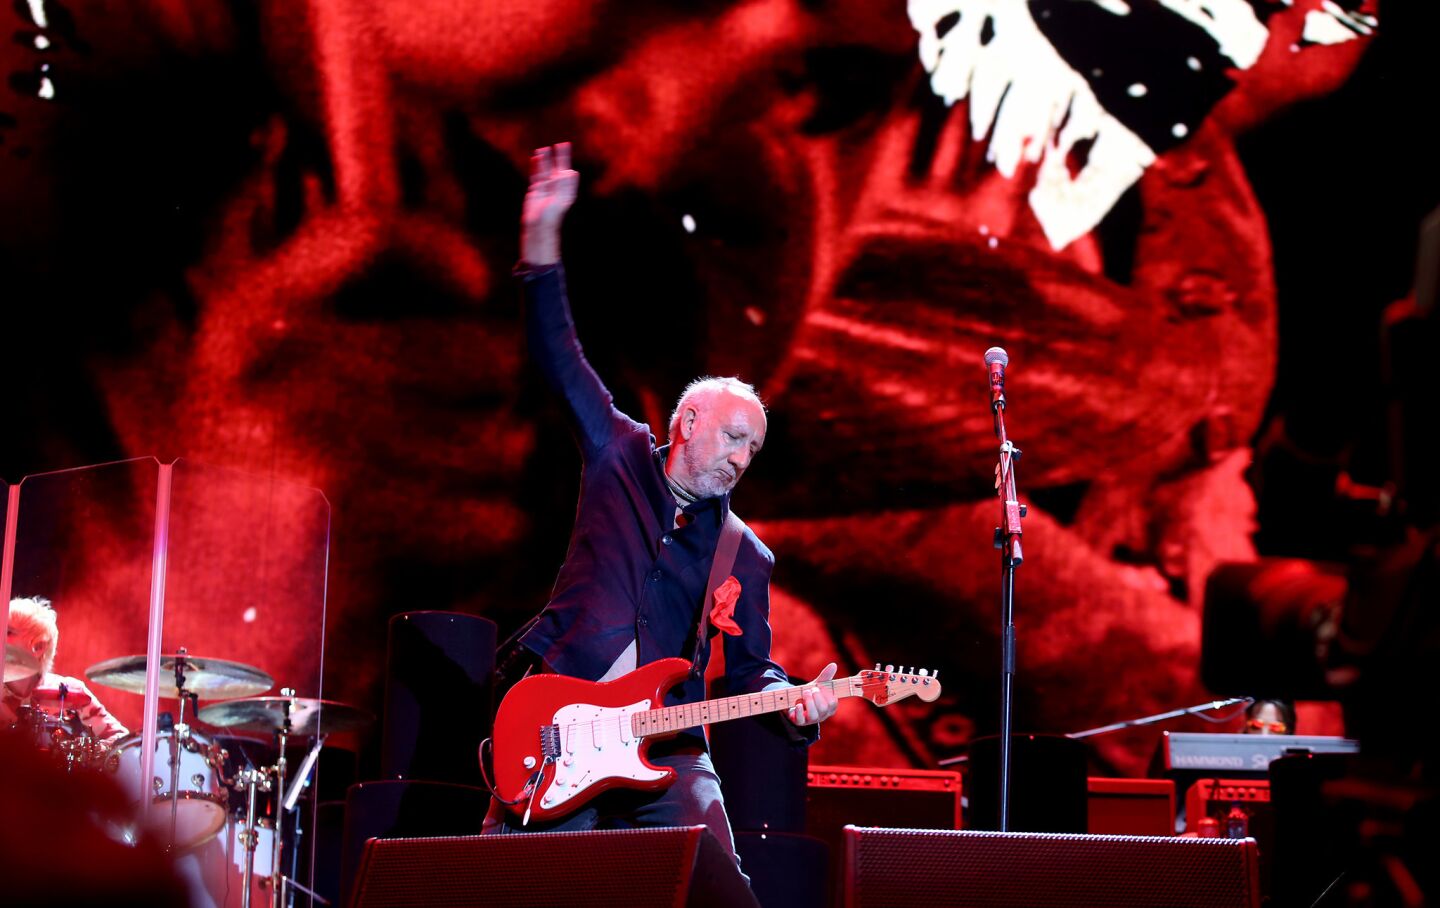 Pete Townshend strums his guitar in his trademark windmill style as The Who performs.